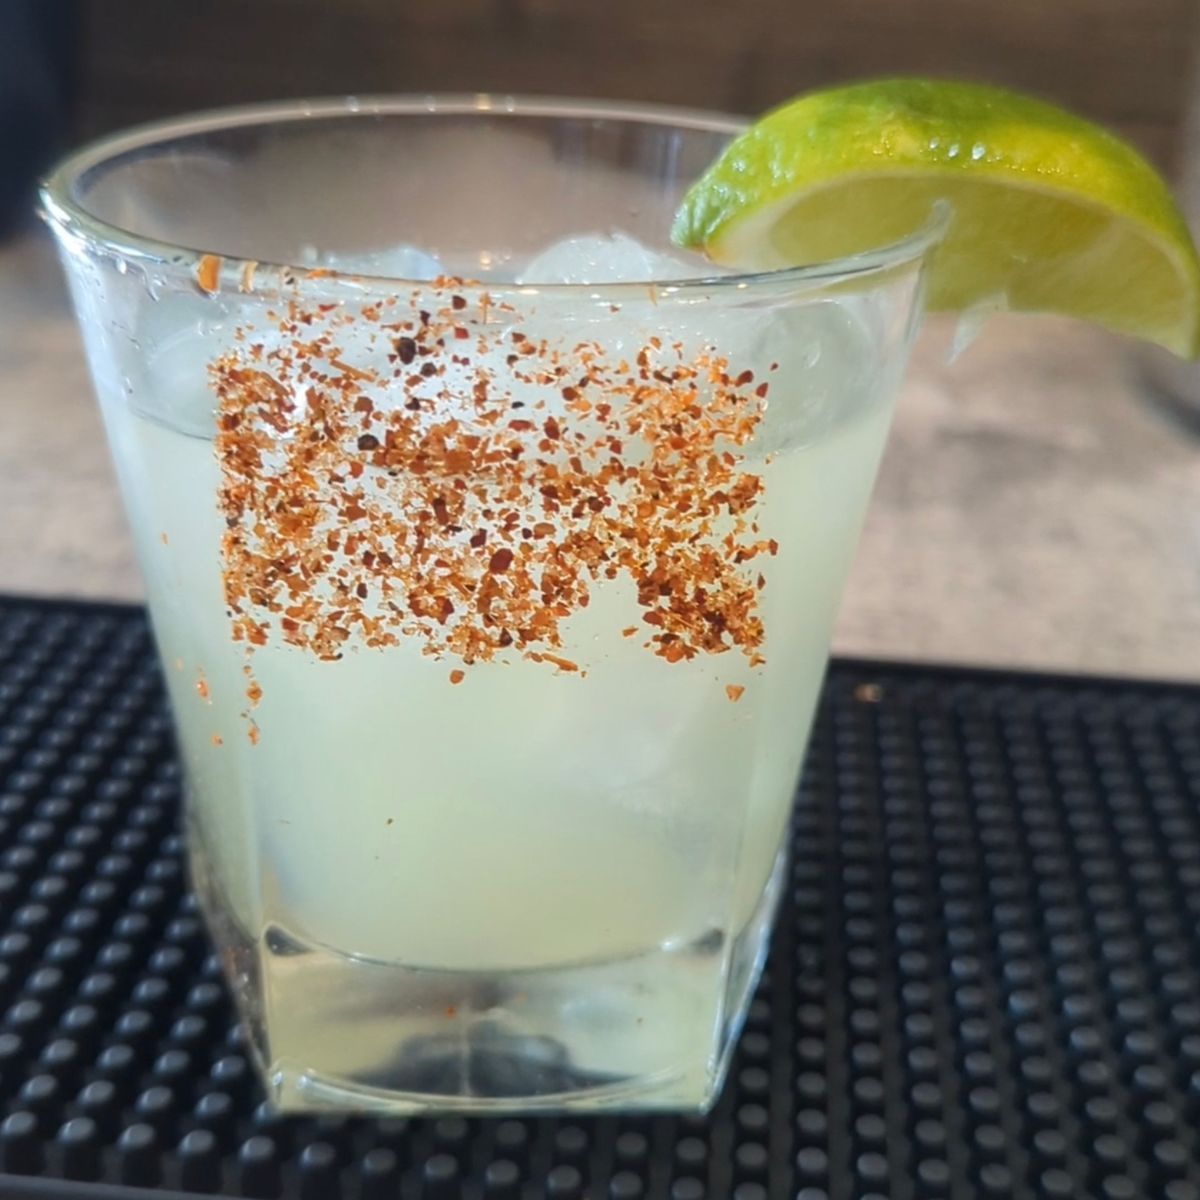 I wanted to make something different for National Margarita Day a few weeks back and found this gem. A delicious smoky and spicy margarita with a mezcal base.